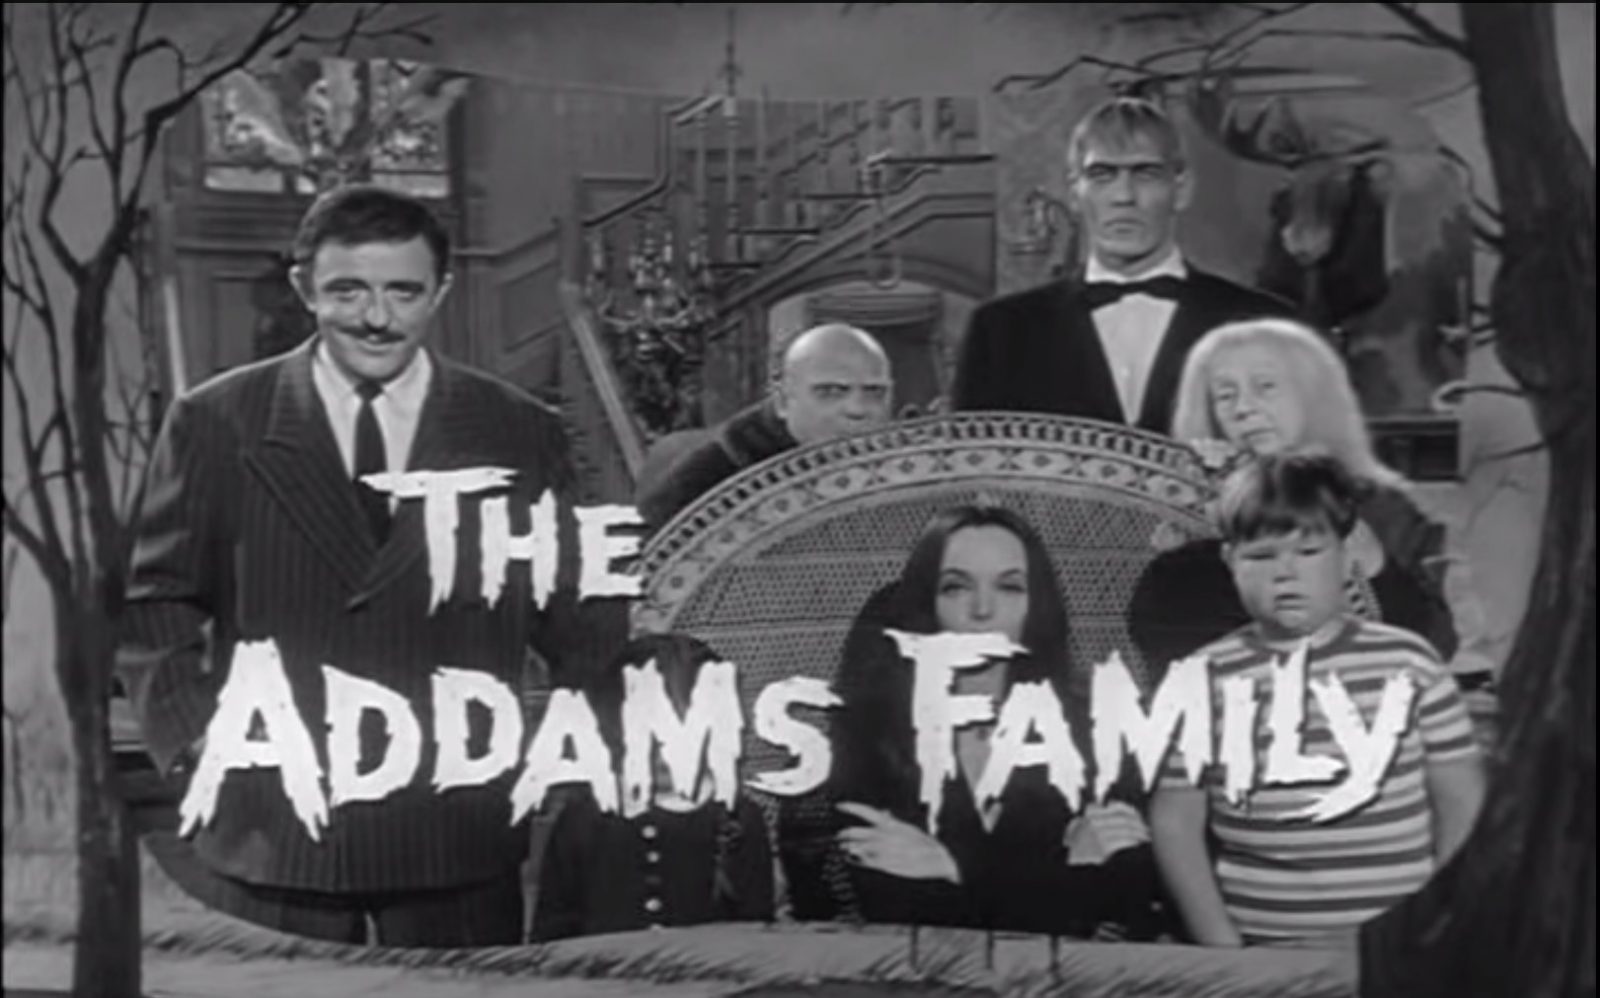 What Does Your Taste in Classic TV Shows Say About You? The Addams Family